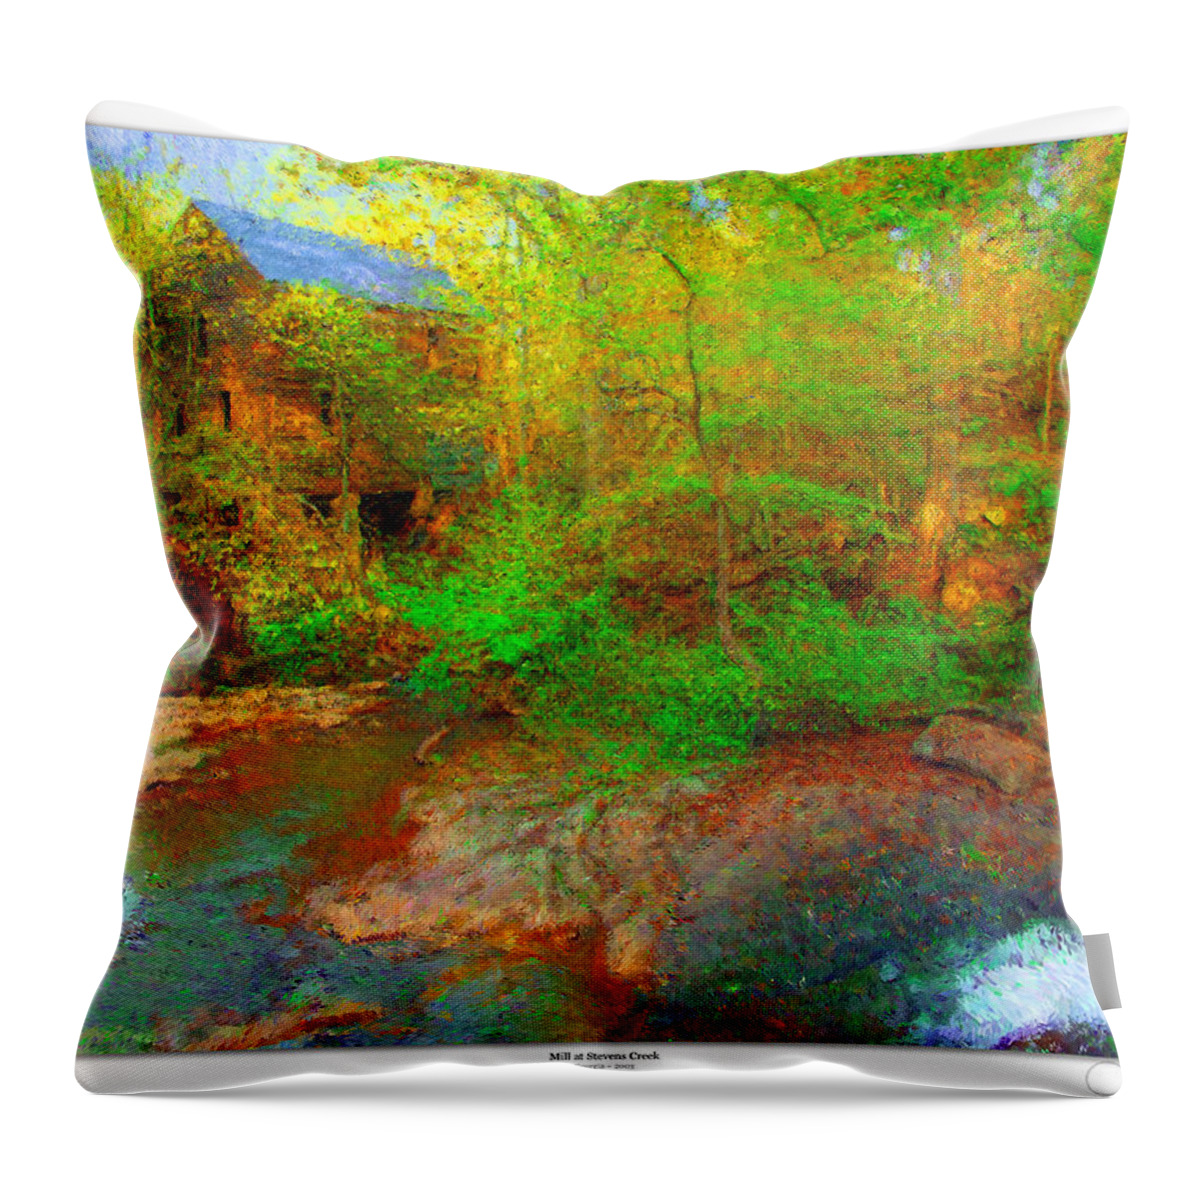 Historic Throw Pillow featuring the painting Mill at Stevens Creek by Lar Matre